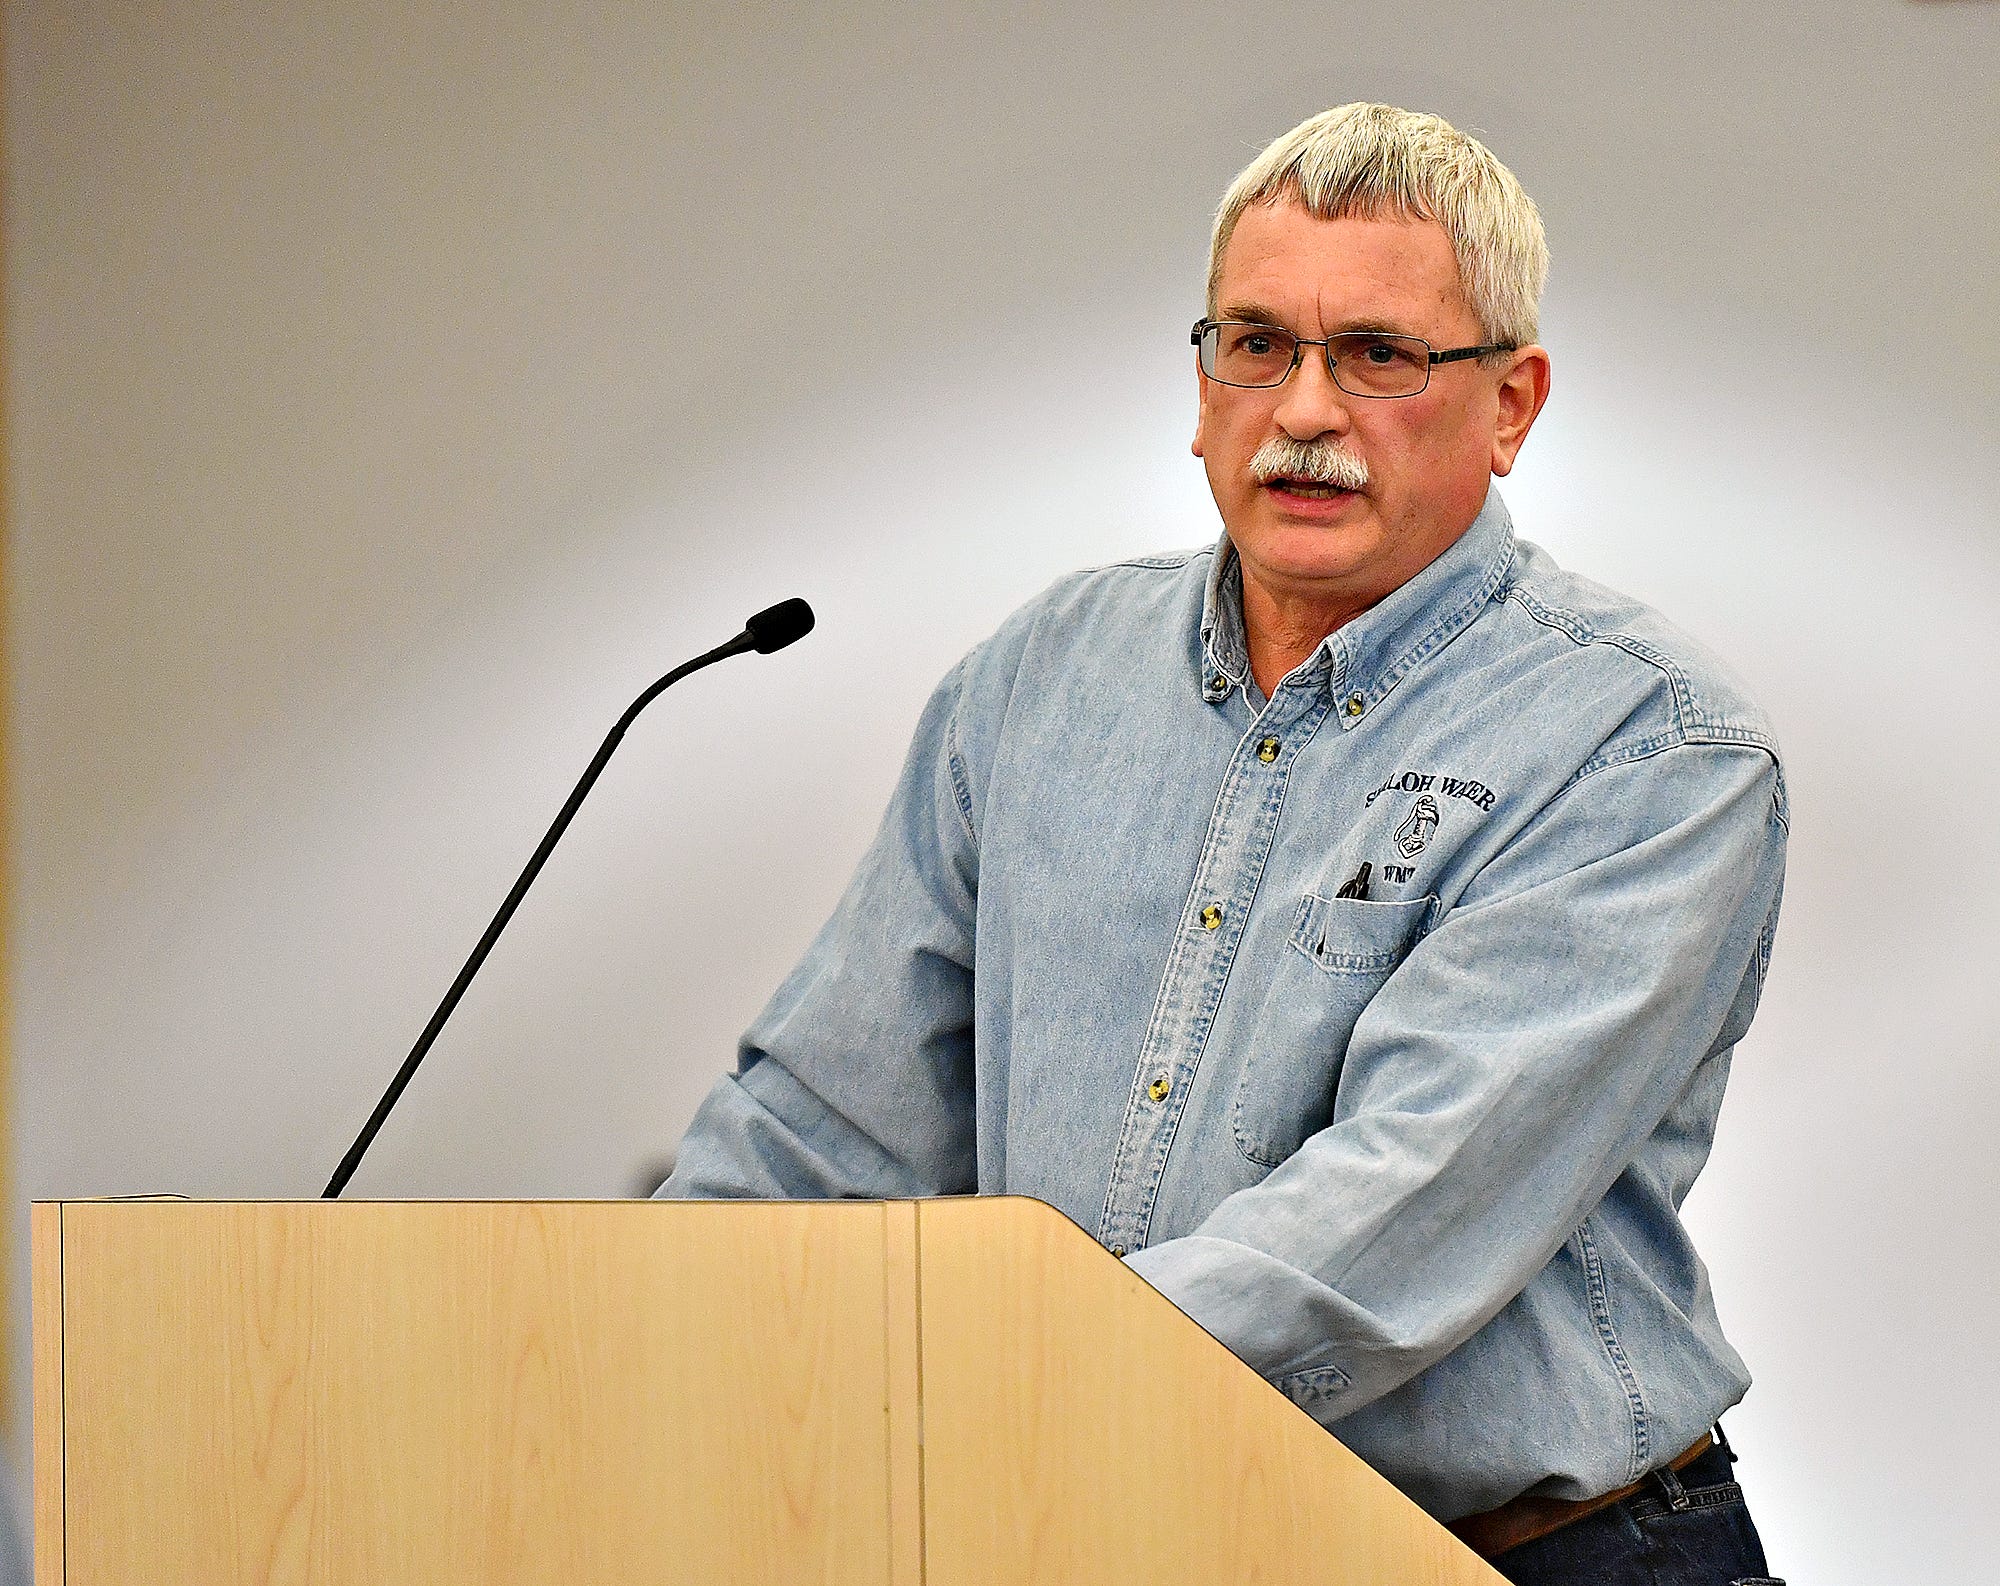 Chairman Jim Bentzel, of Shiloh Water Authority, at a public hearing on Monday said the board will vote in late March will vote in late March on on defluoridation.